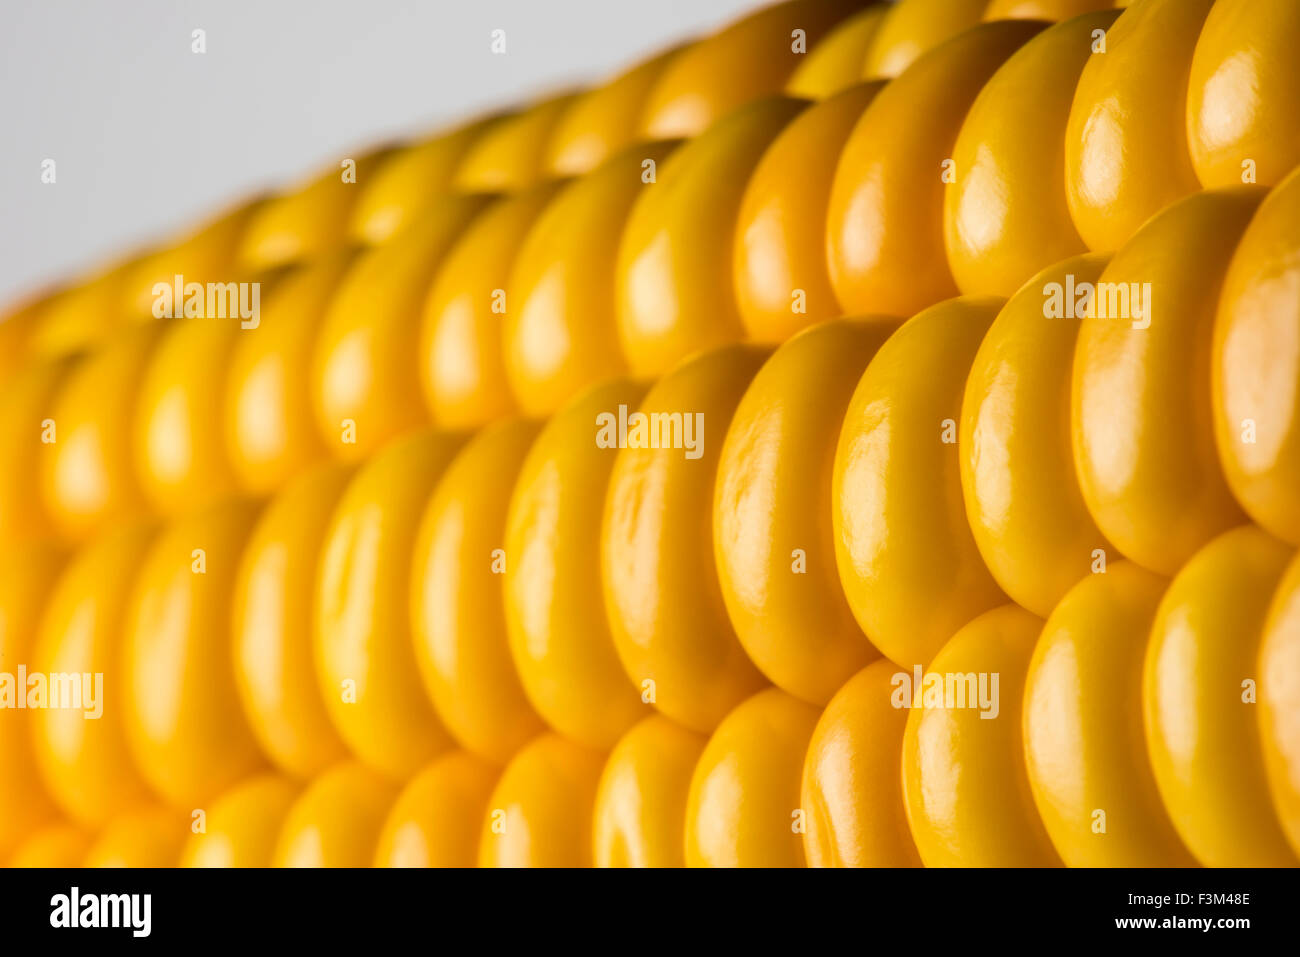 Abstract detail of corn on the cob Stock Photo